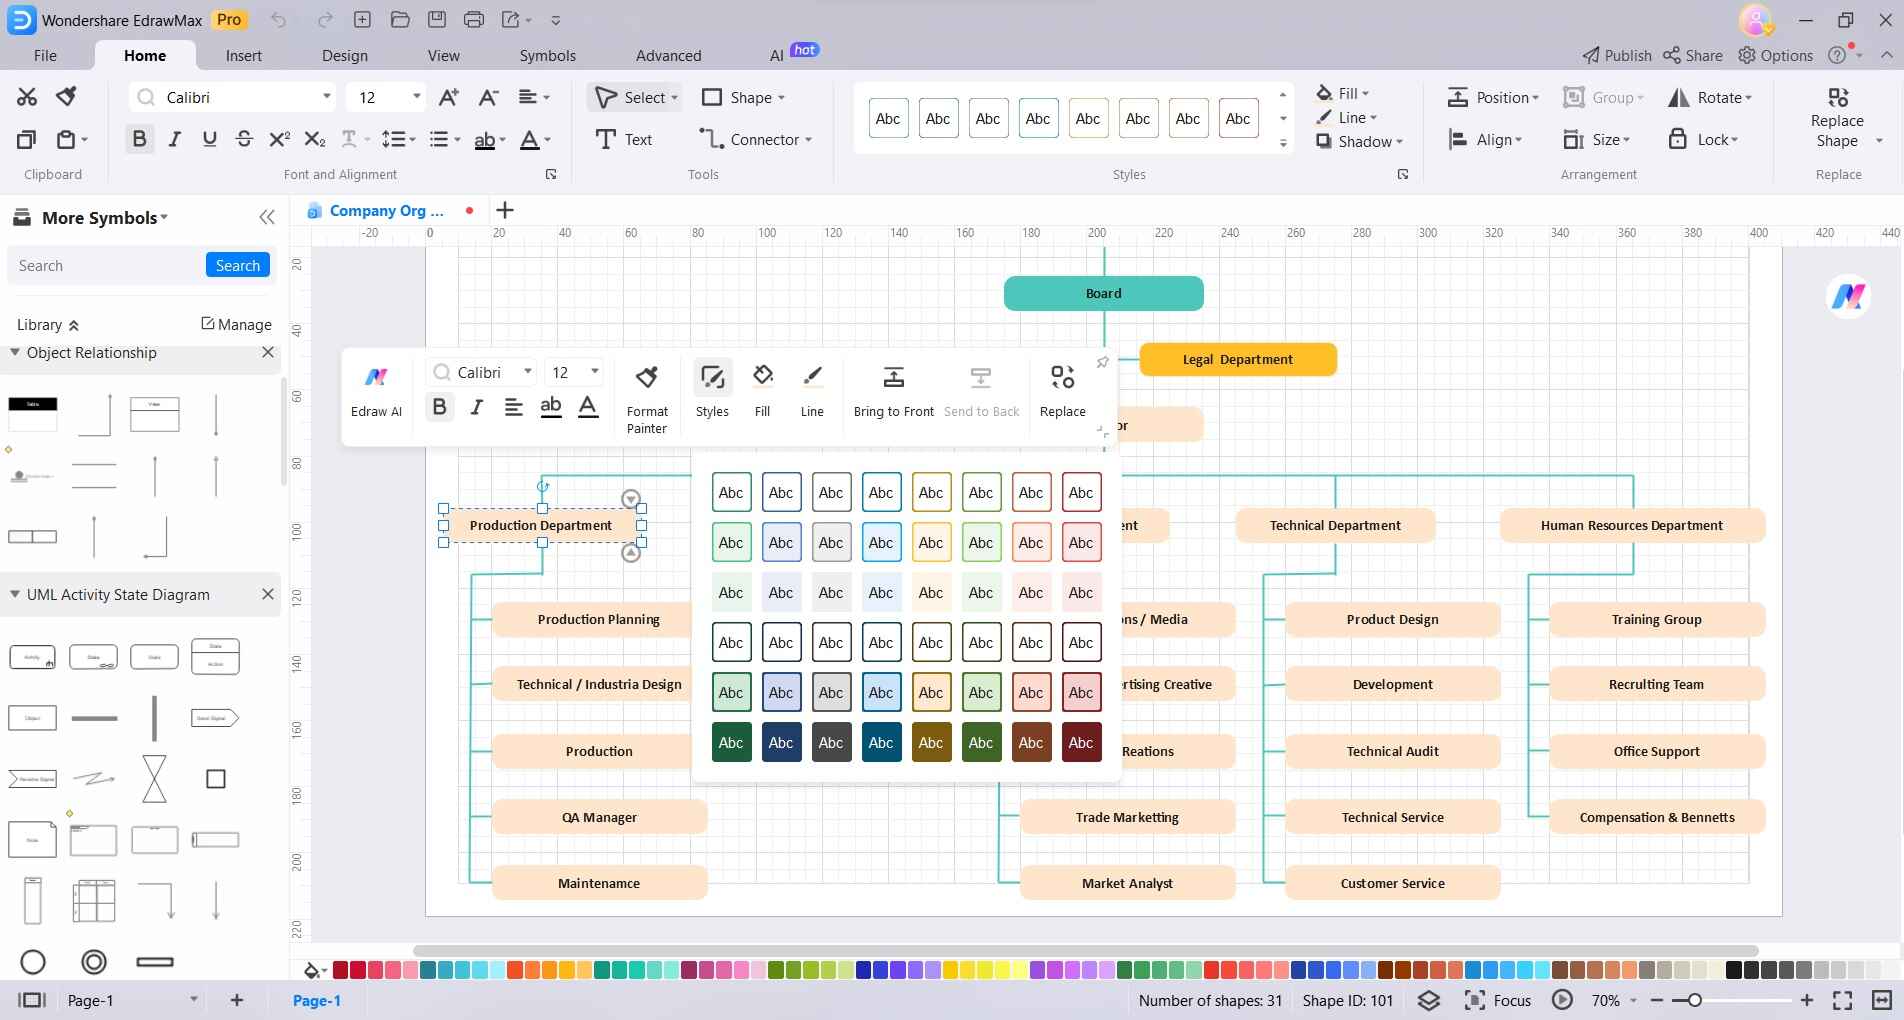 format color and style of org chart in edrawmax